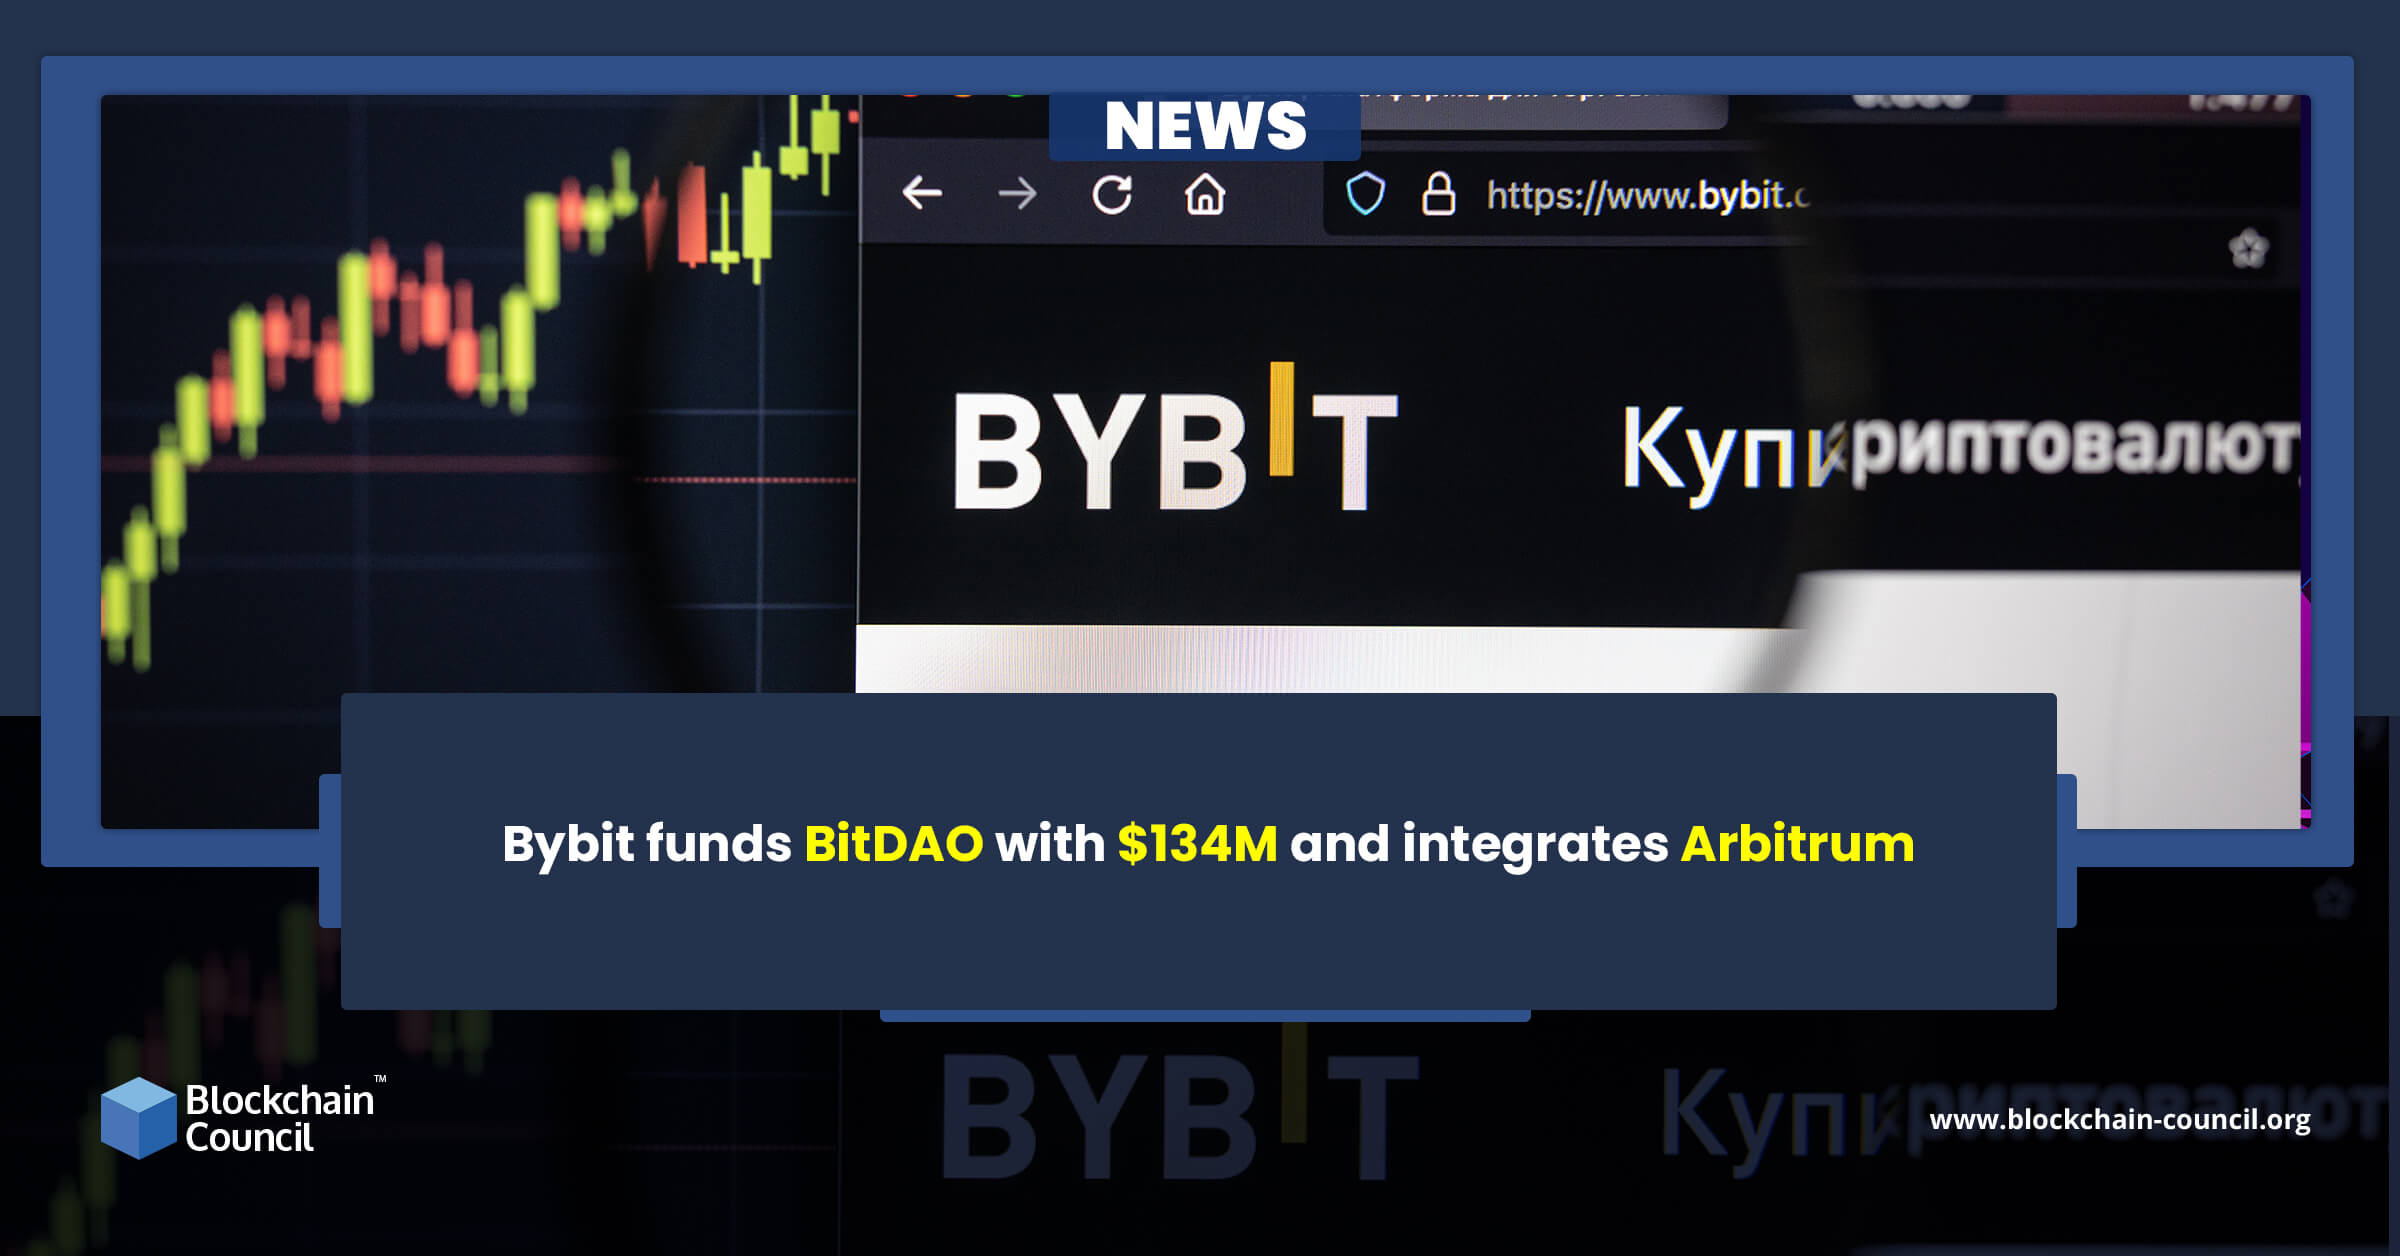 Bybit funds BitDAO with $134M and integrates Arbitrum